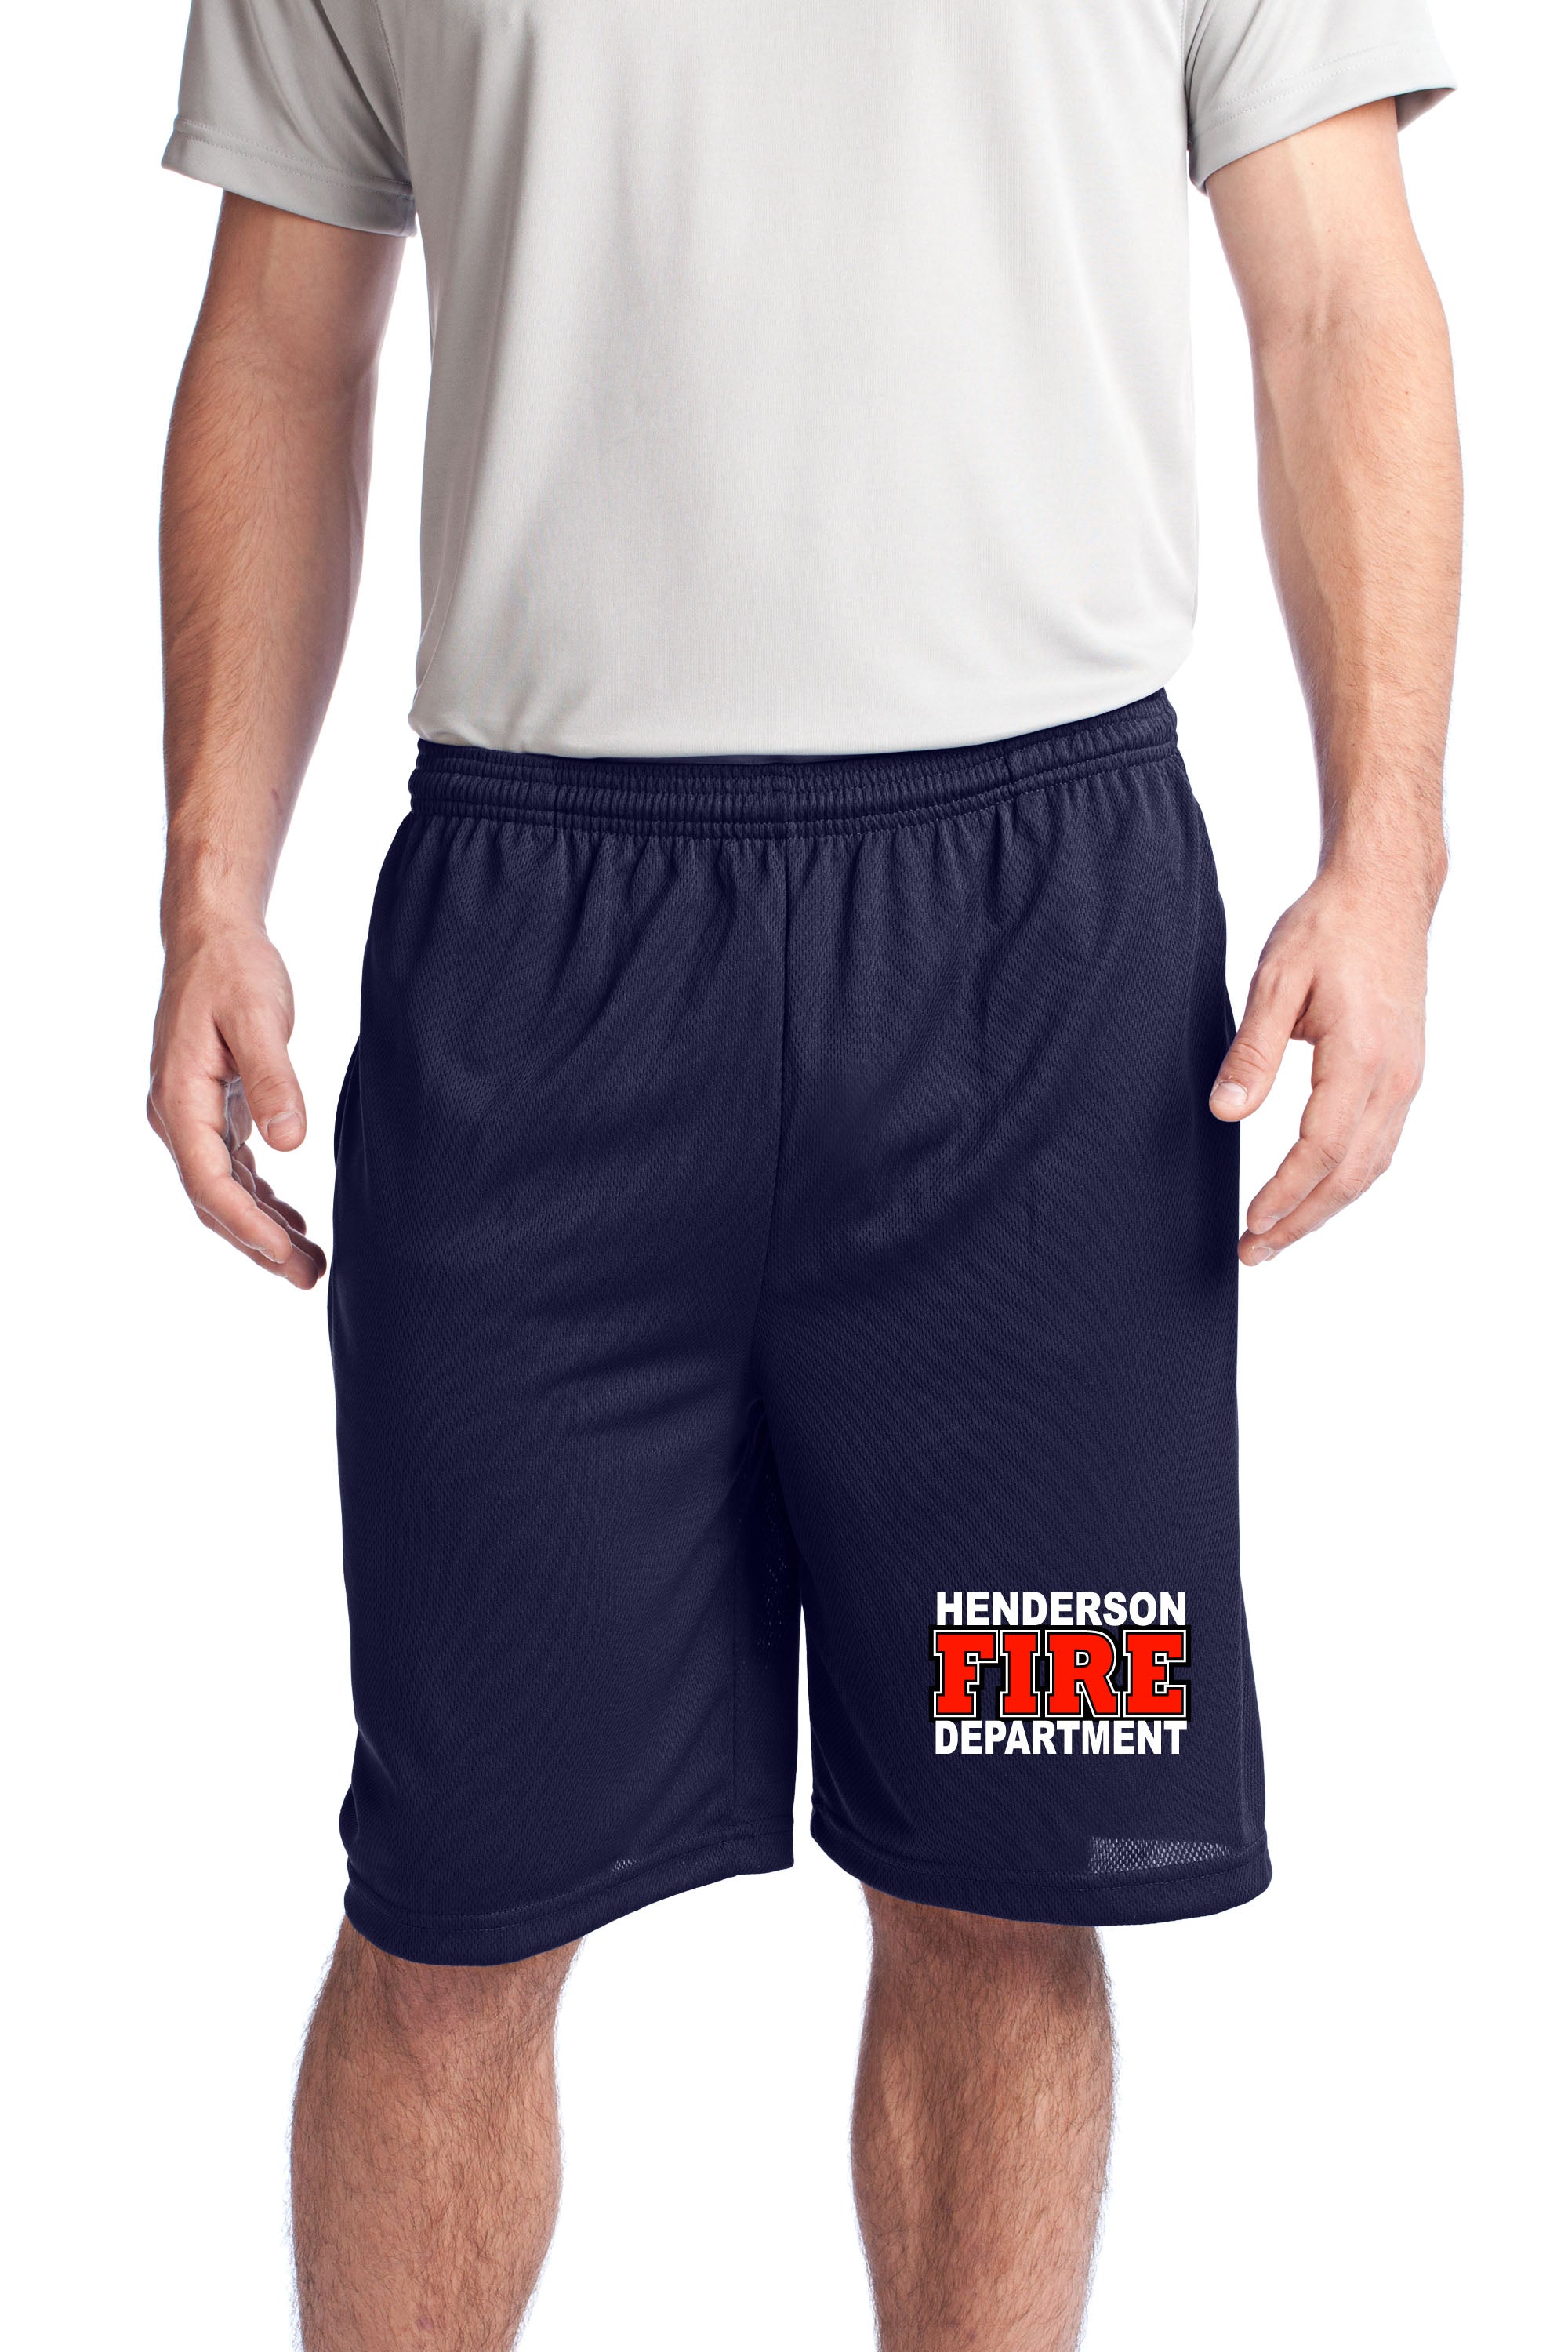 HFD POCKETED POLYESTER OFF DUTY Workout Shorts (ST312)